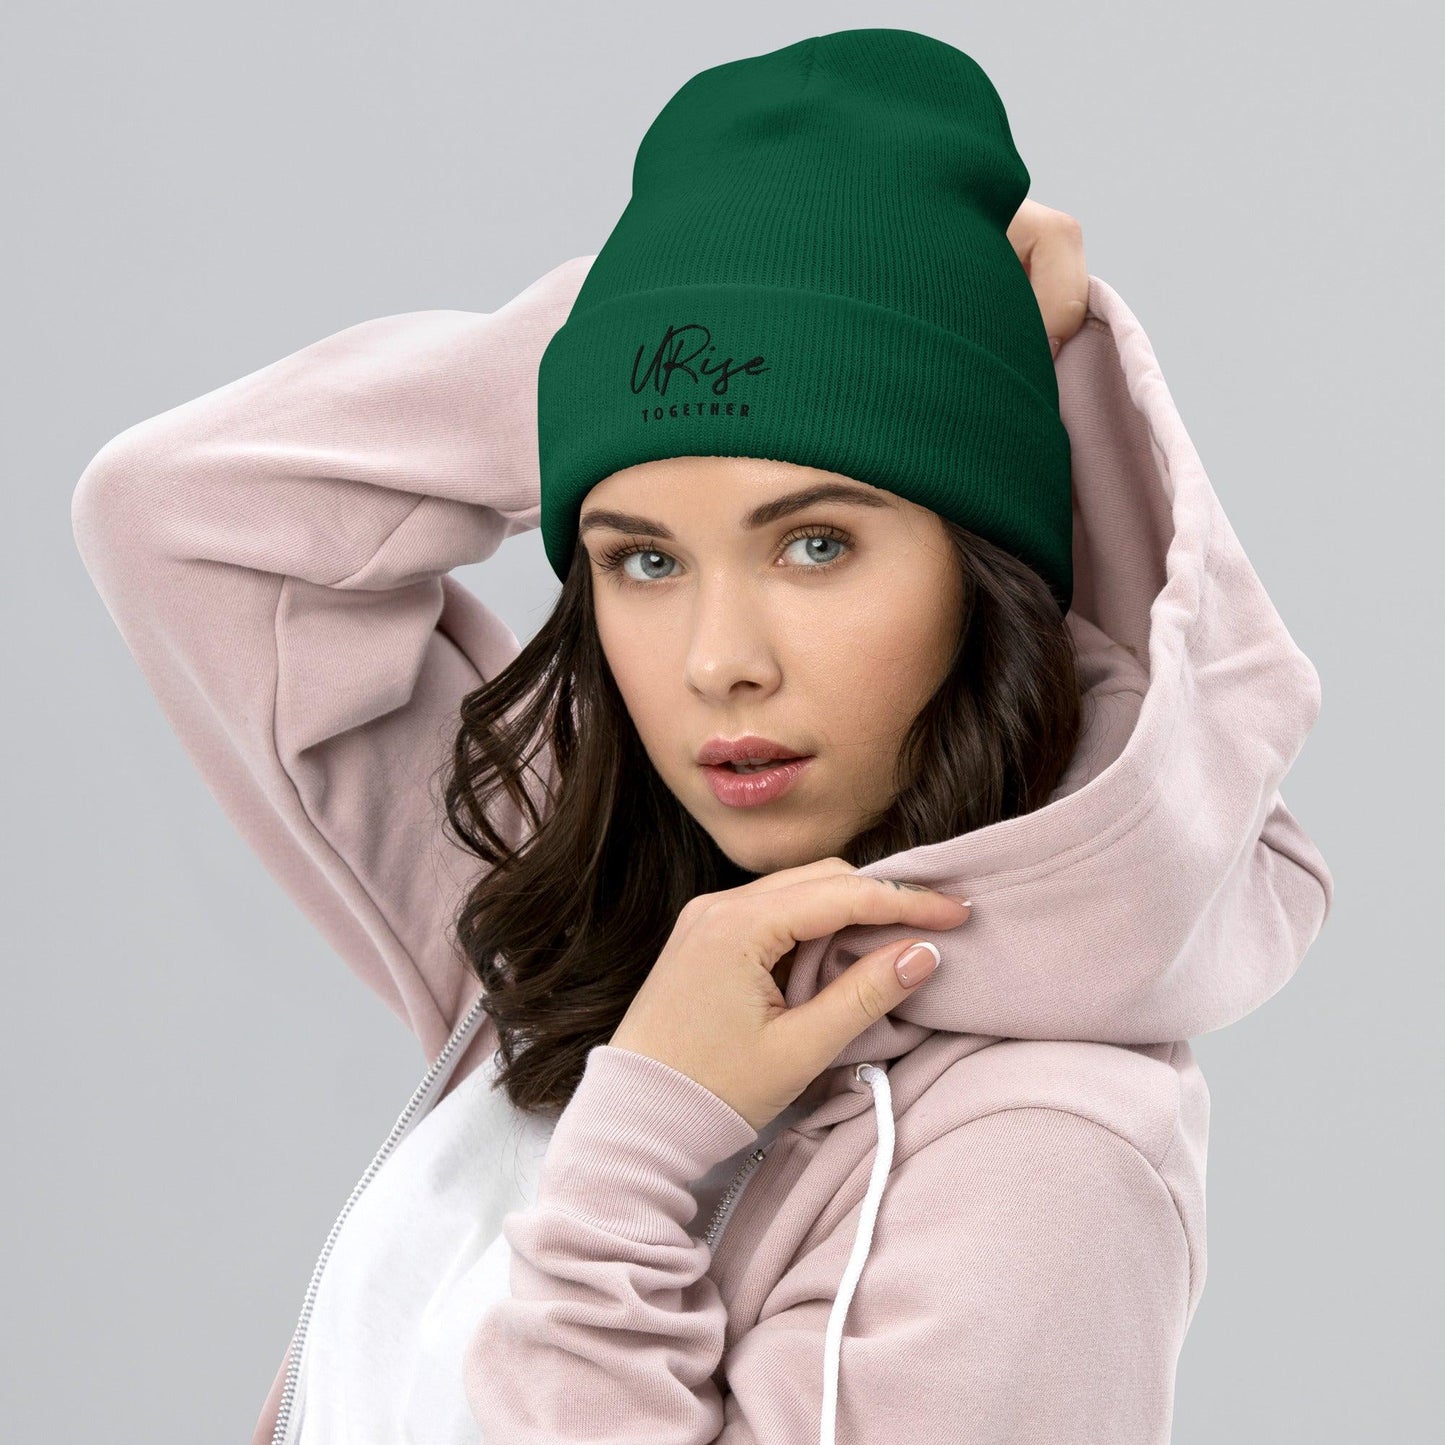 "URise Together" Embroidered Cuffed Beanie - Green - URiseTogetherApparel